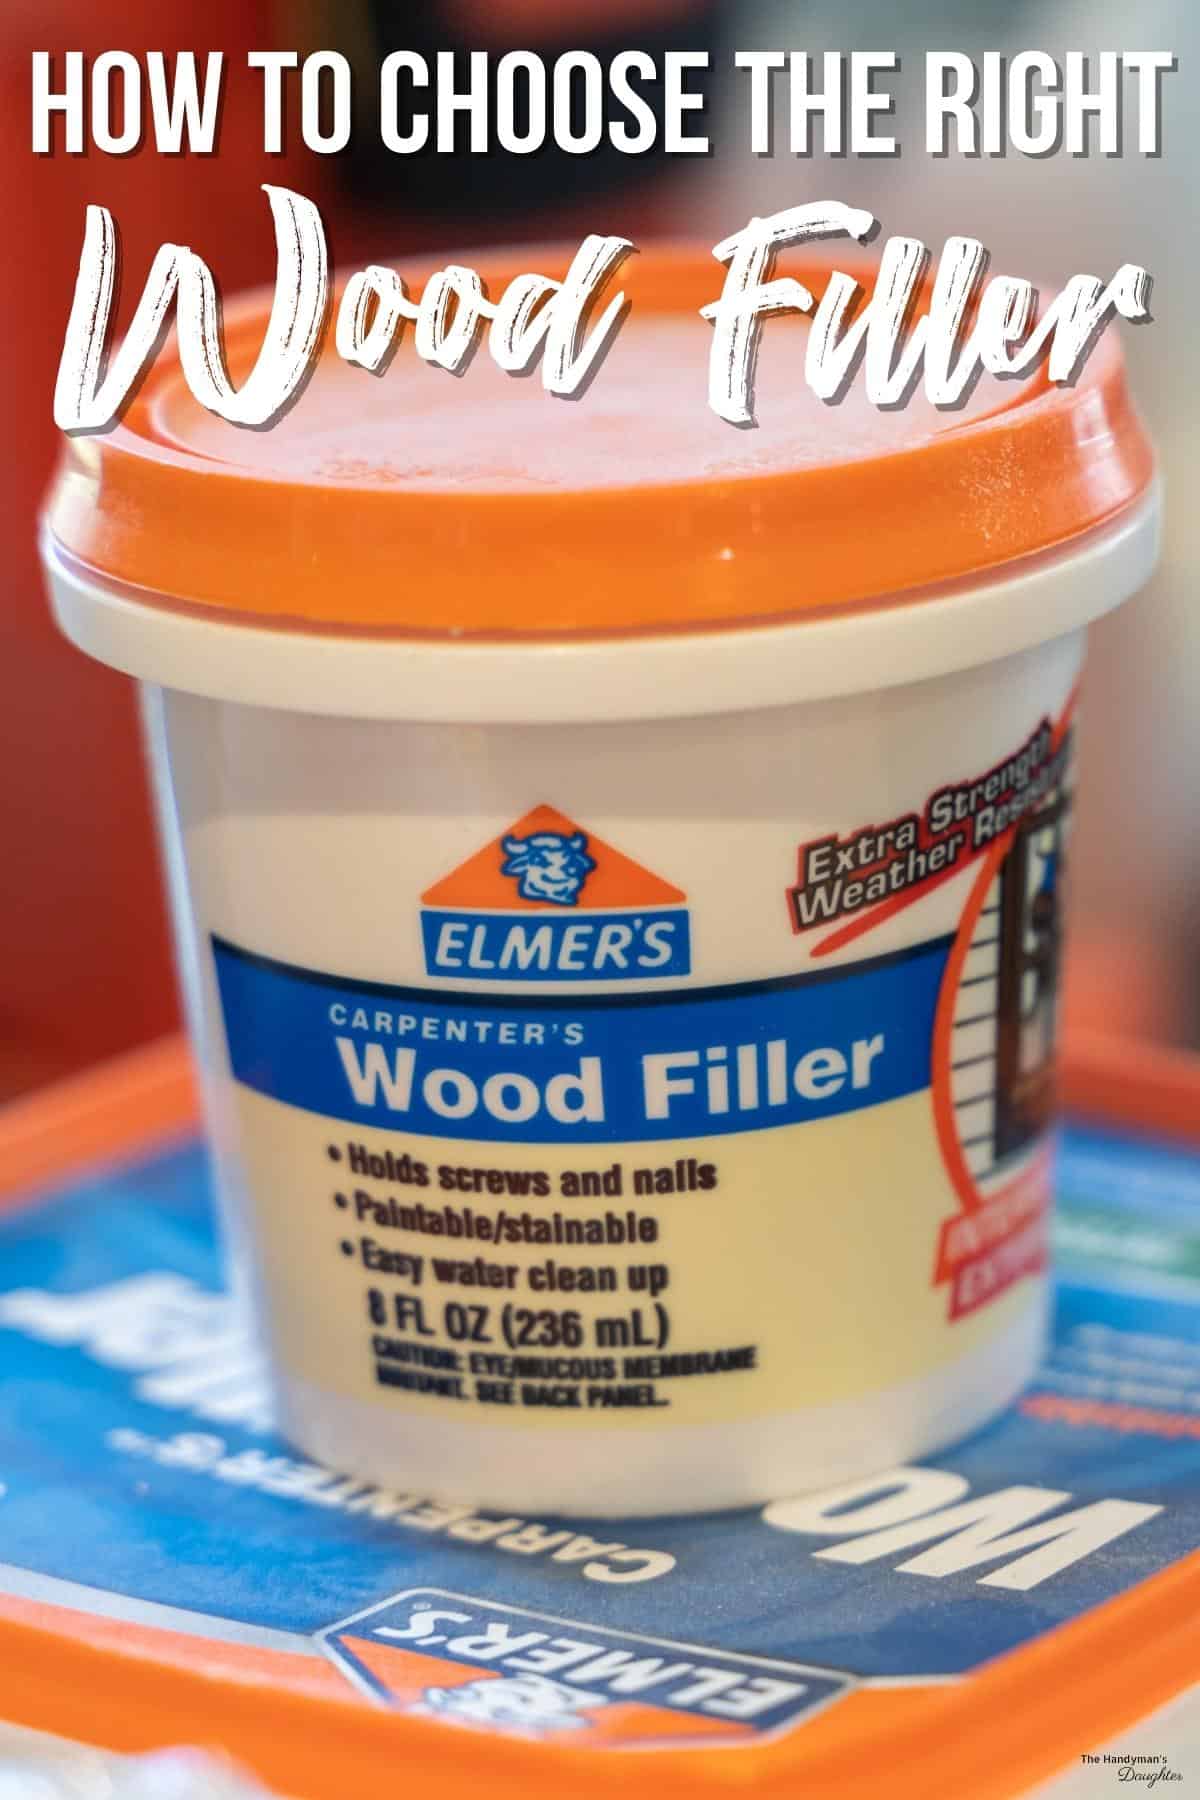 "how to choose the right wood filler" text overlay on picture of Elmer's wood filler container